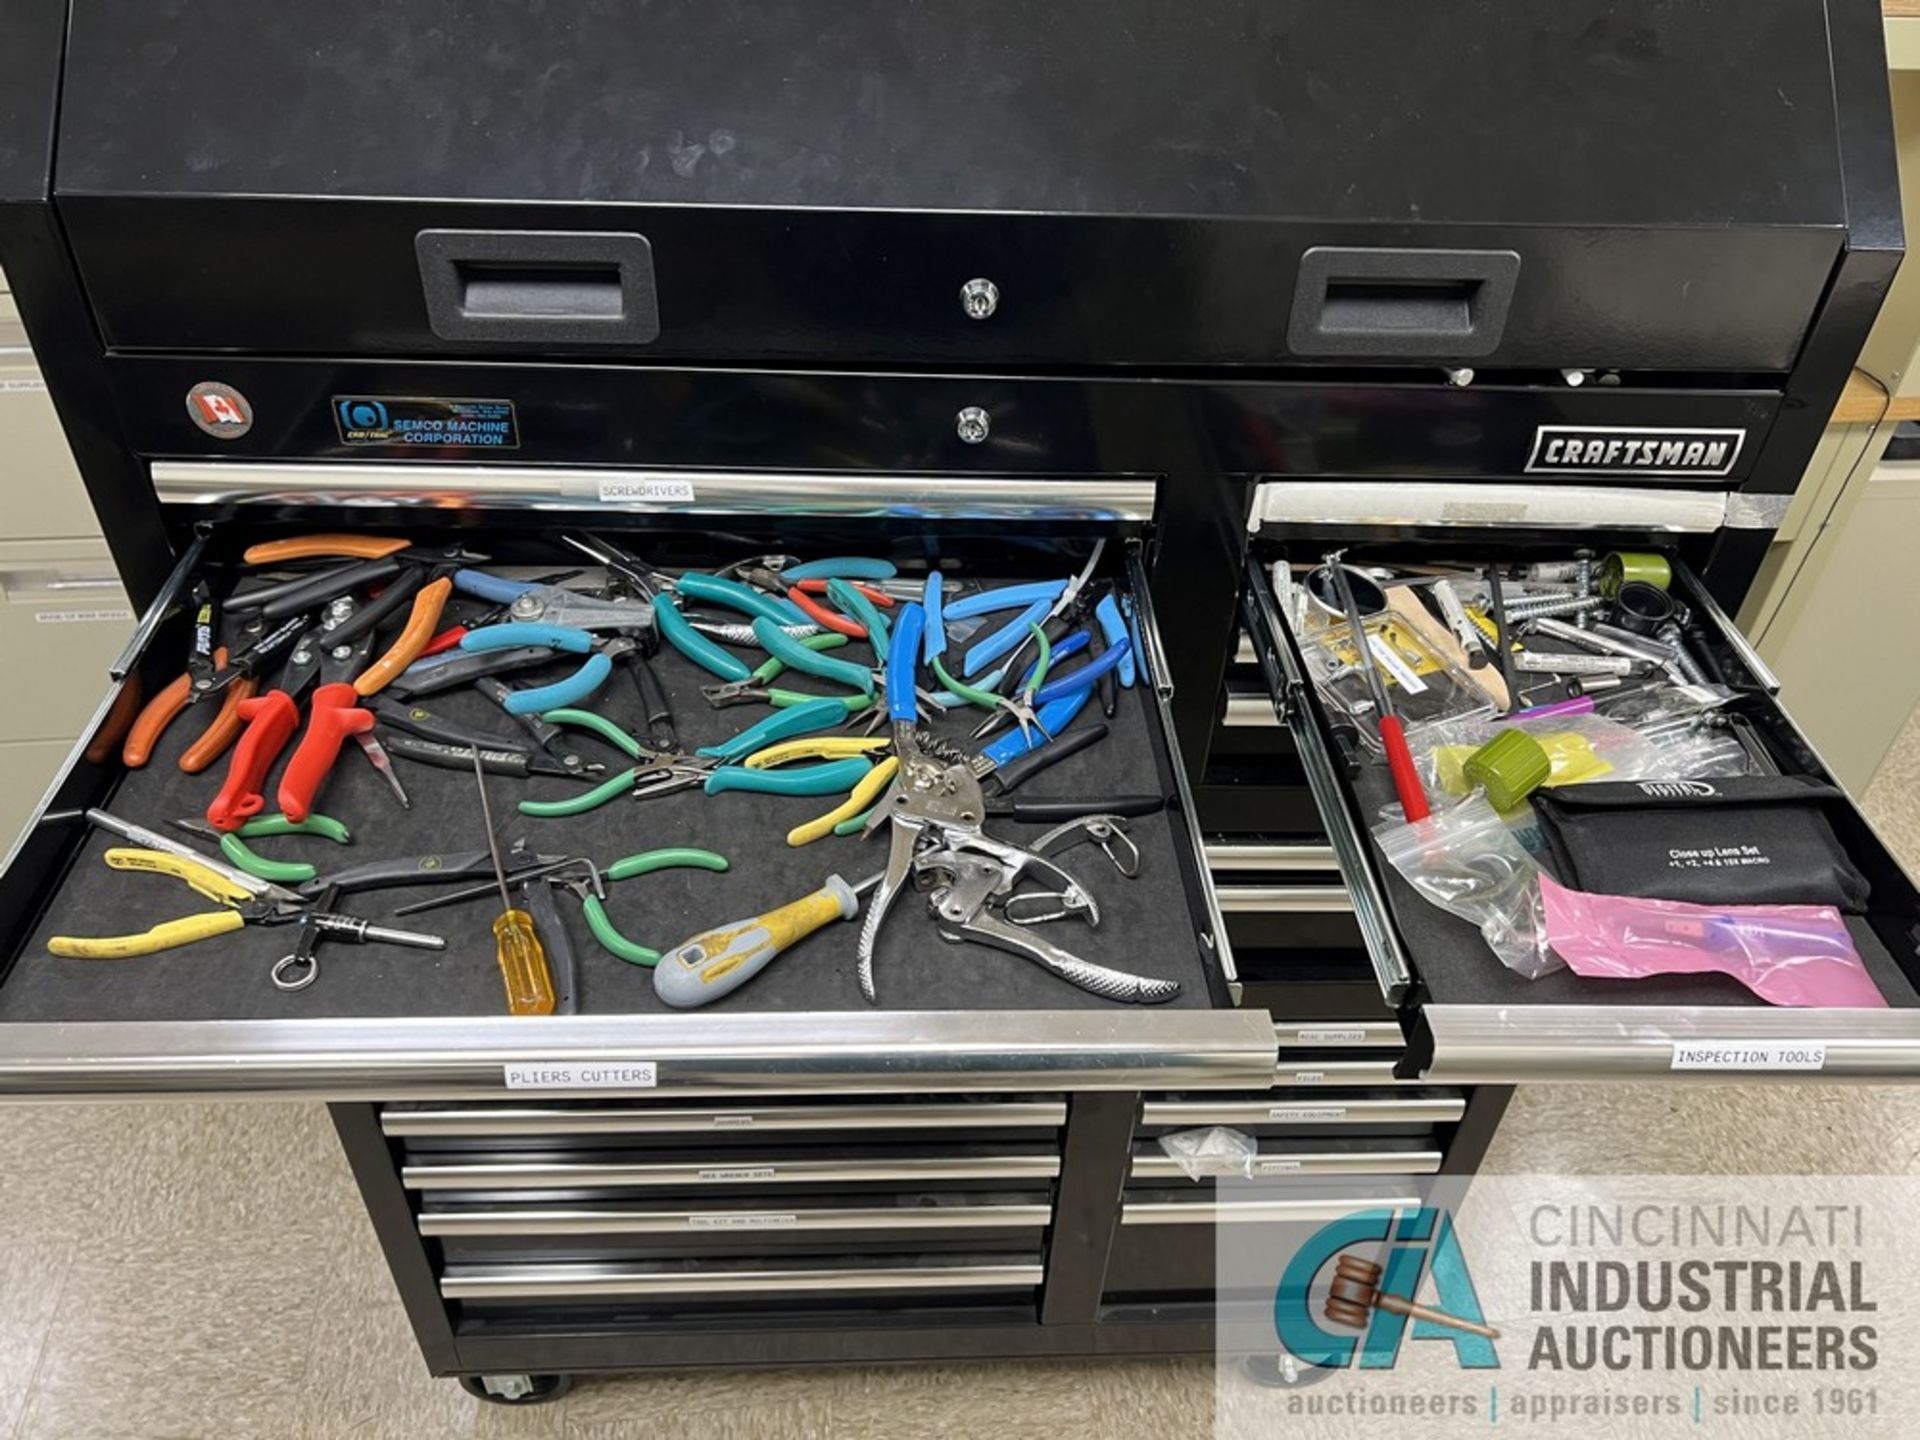 21-DRAWER CRAFTSMAN TOOLBOX WITH TOOLS (ENG LAB) - Image 4 of 13